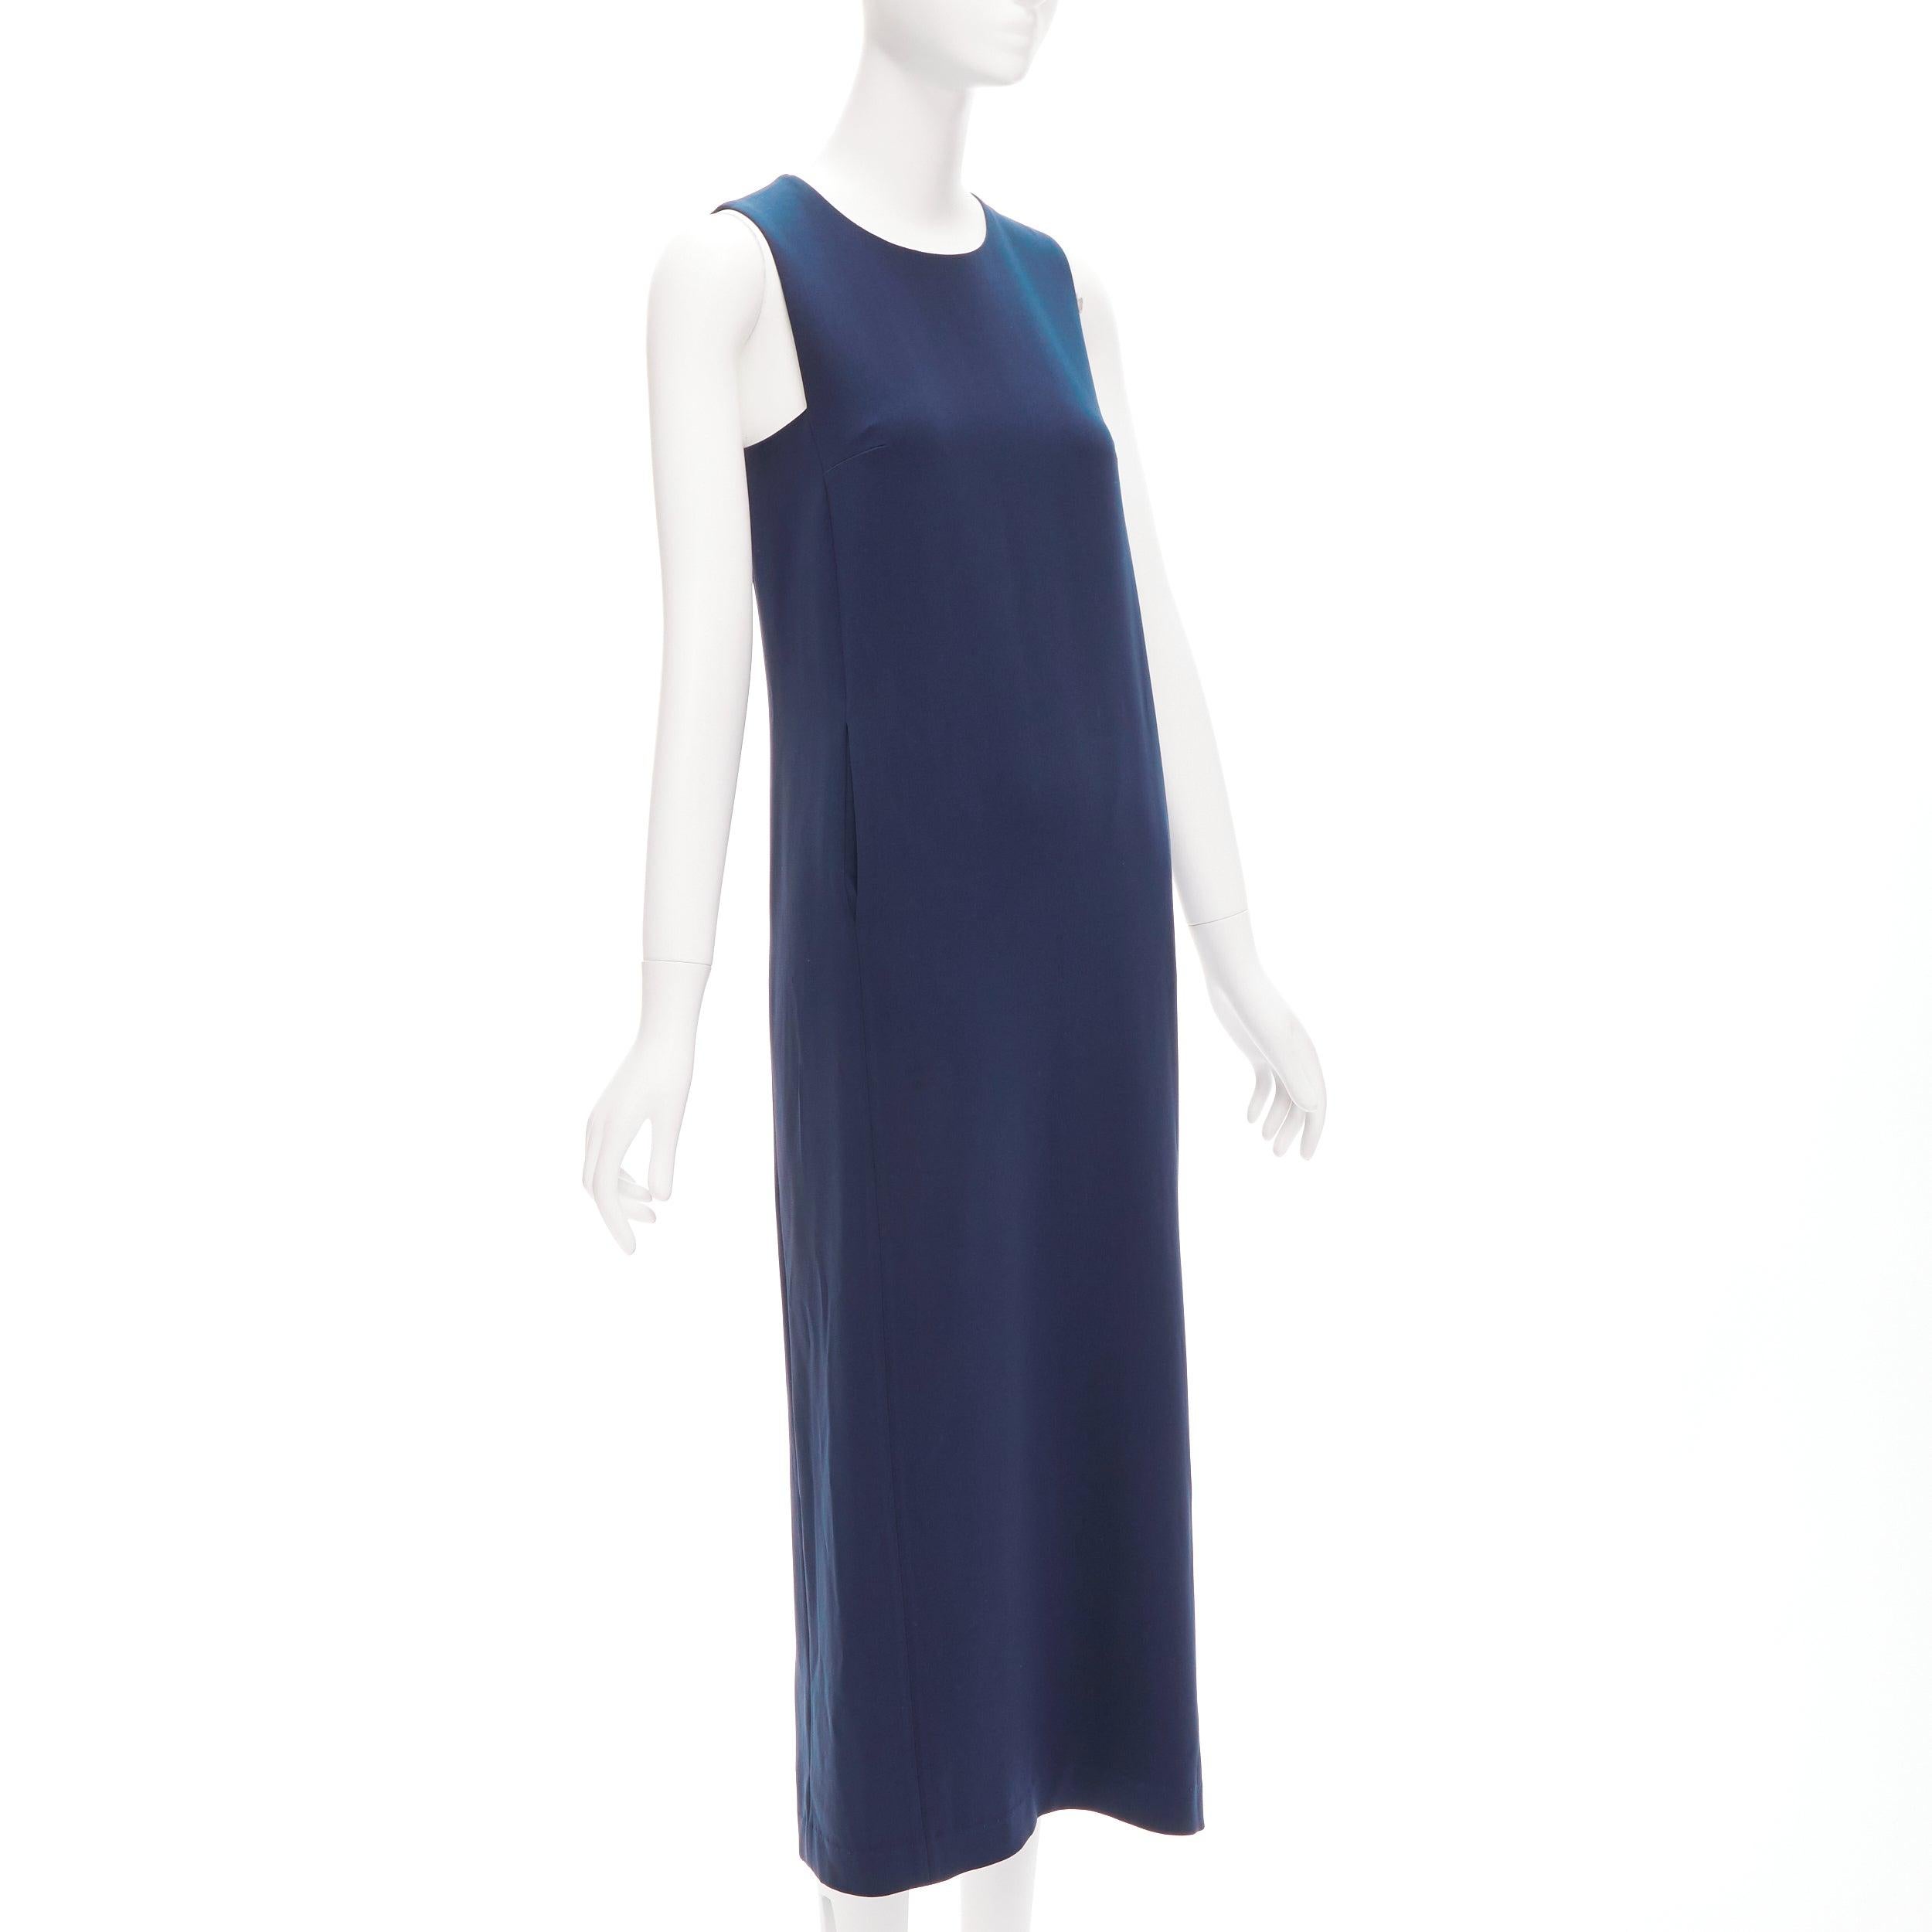 THEORY navy minimal classic round neck midi shift dress US0 XS
Reference: CELG/A00387
Brand: Theory
Material: Triacetate, Blend
Color: Navy
Pattern: Solid
Closure: Zip
Lining: Navy Fabric
Extra Details: Zip back.
Made in: United